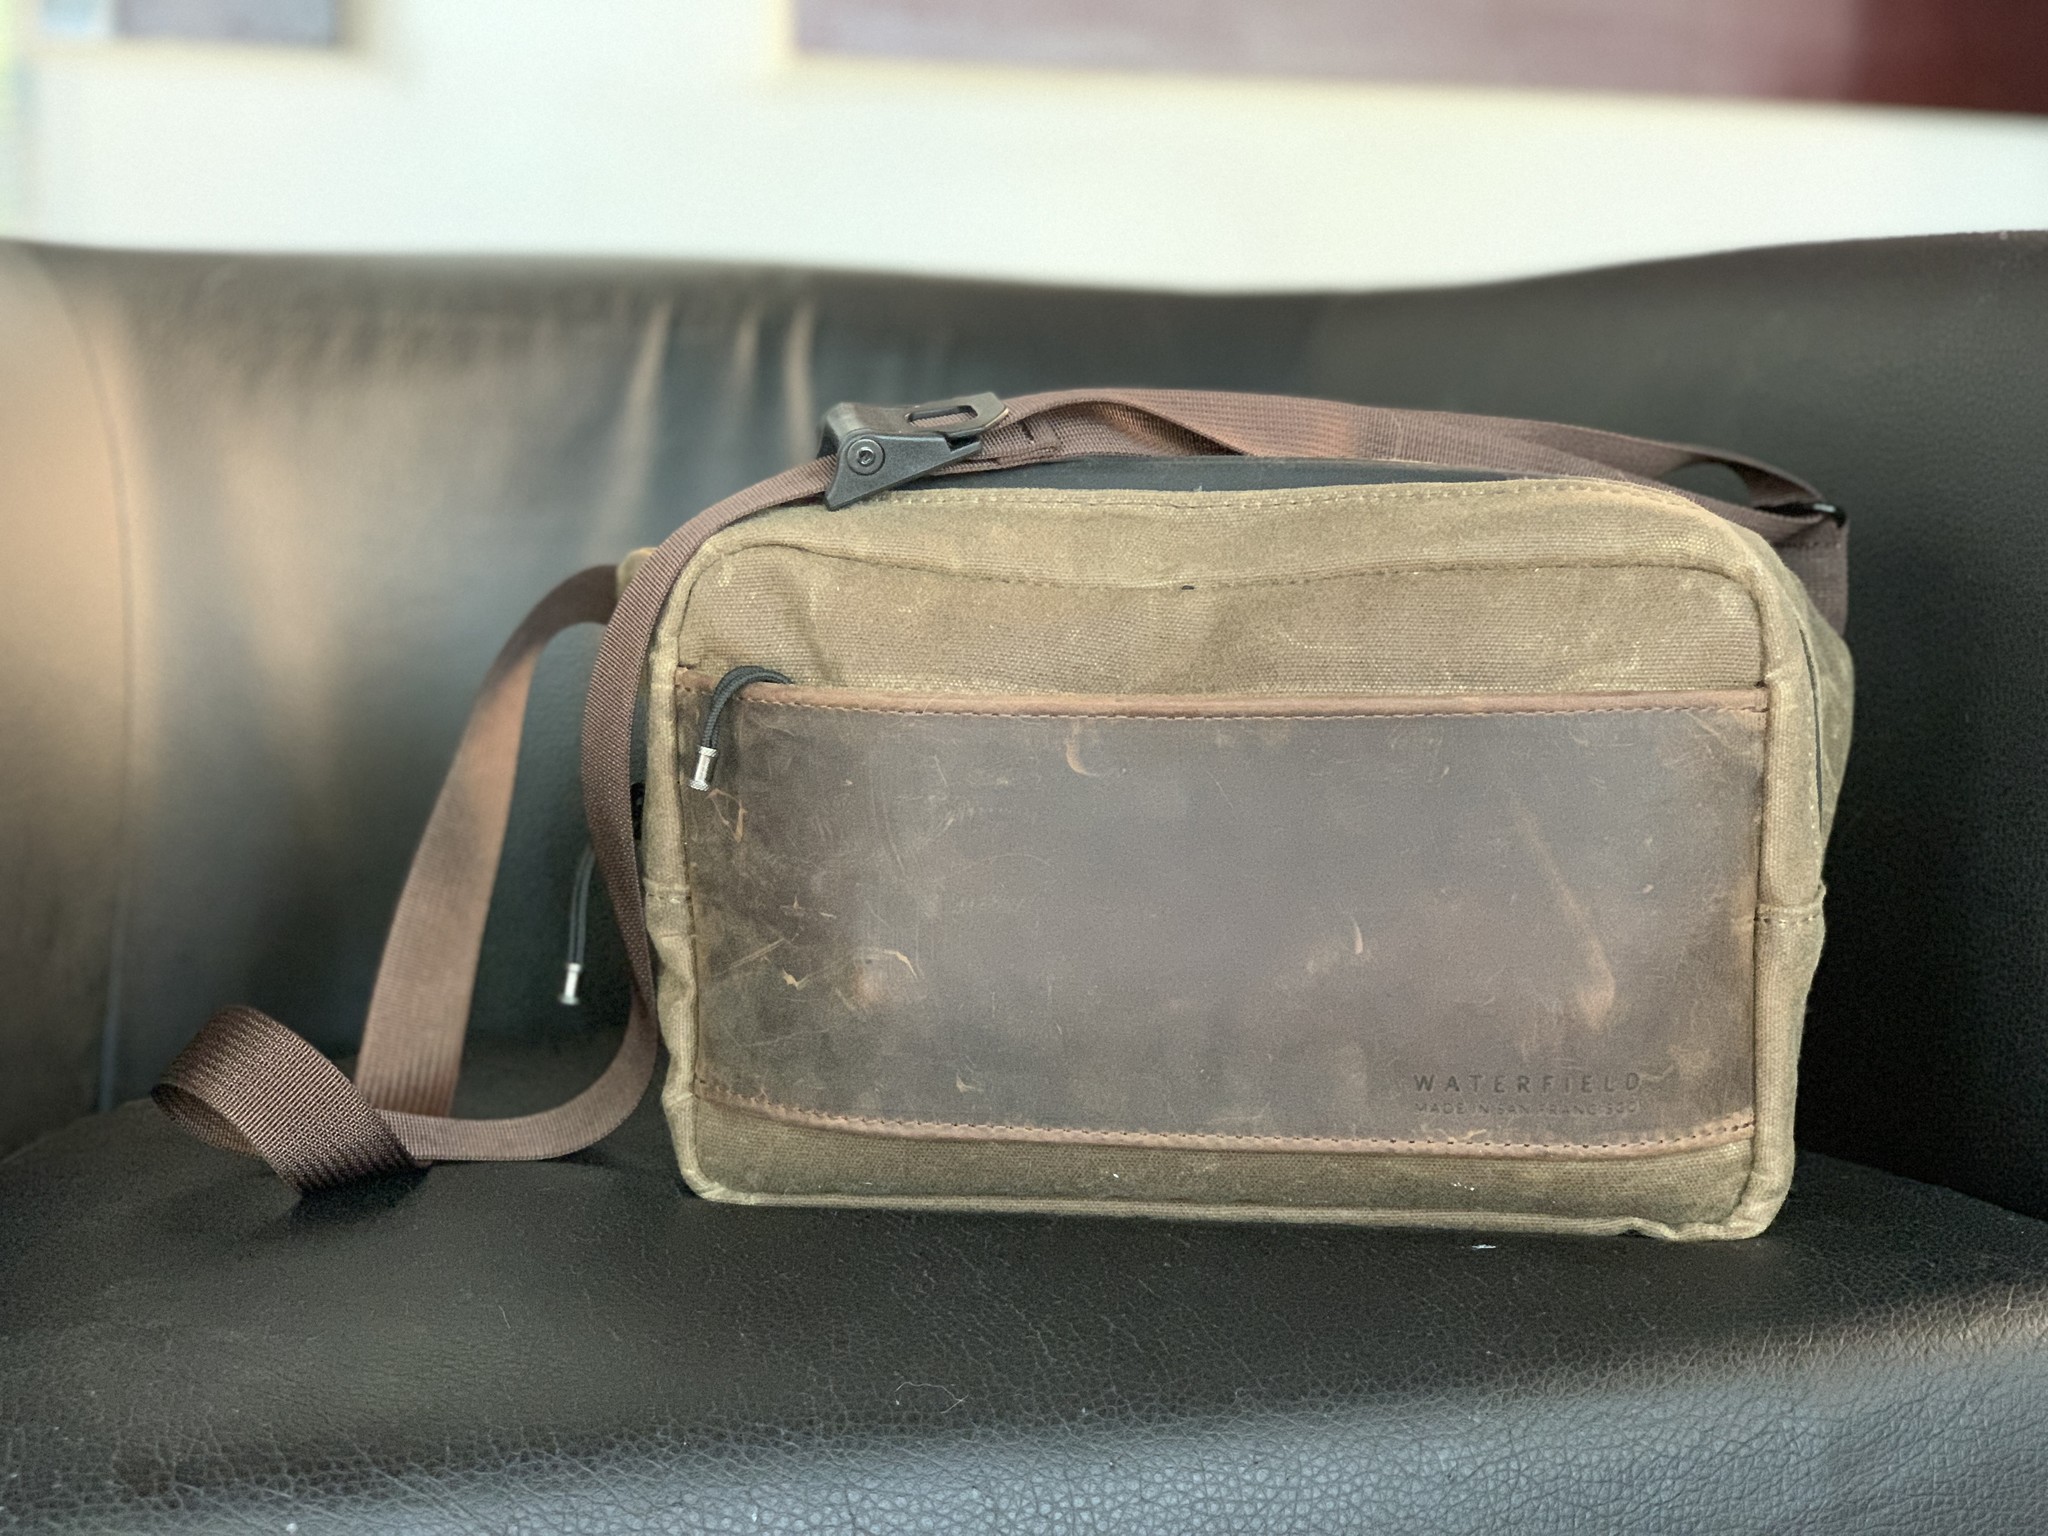 Waterfield Designs Sutter Sling Pouch for Nintendo Switch sitting on a black leather chair